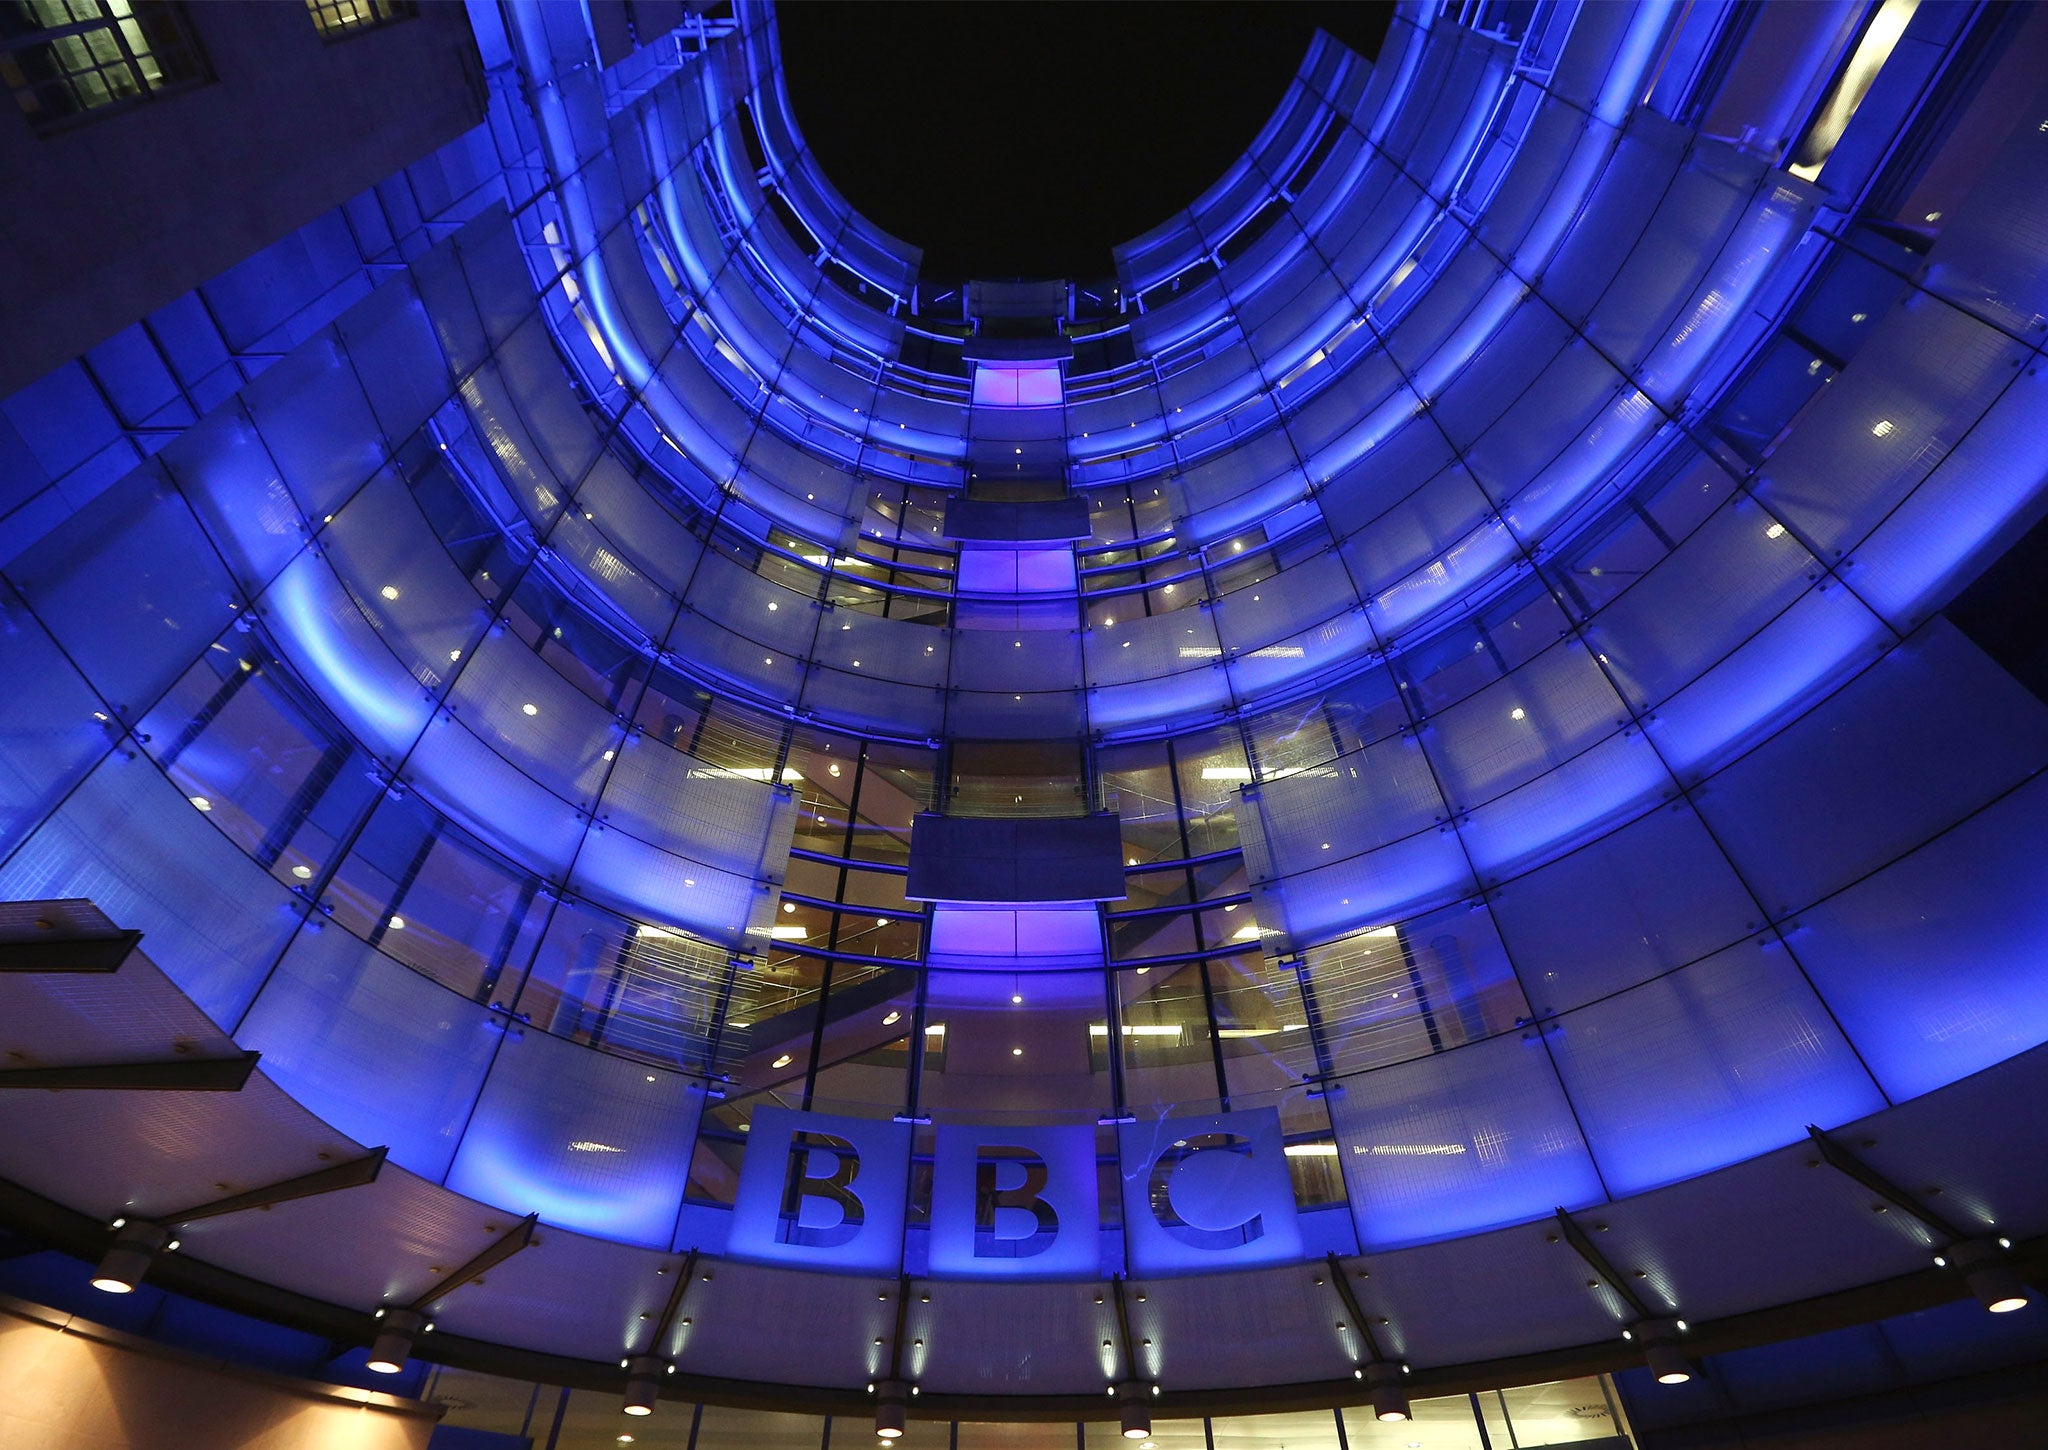 The BBC headquarters at New Broadcasting House is illuminated at night in London, England.